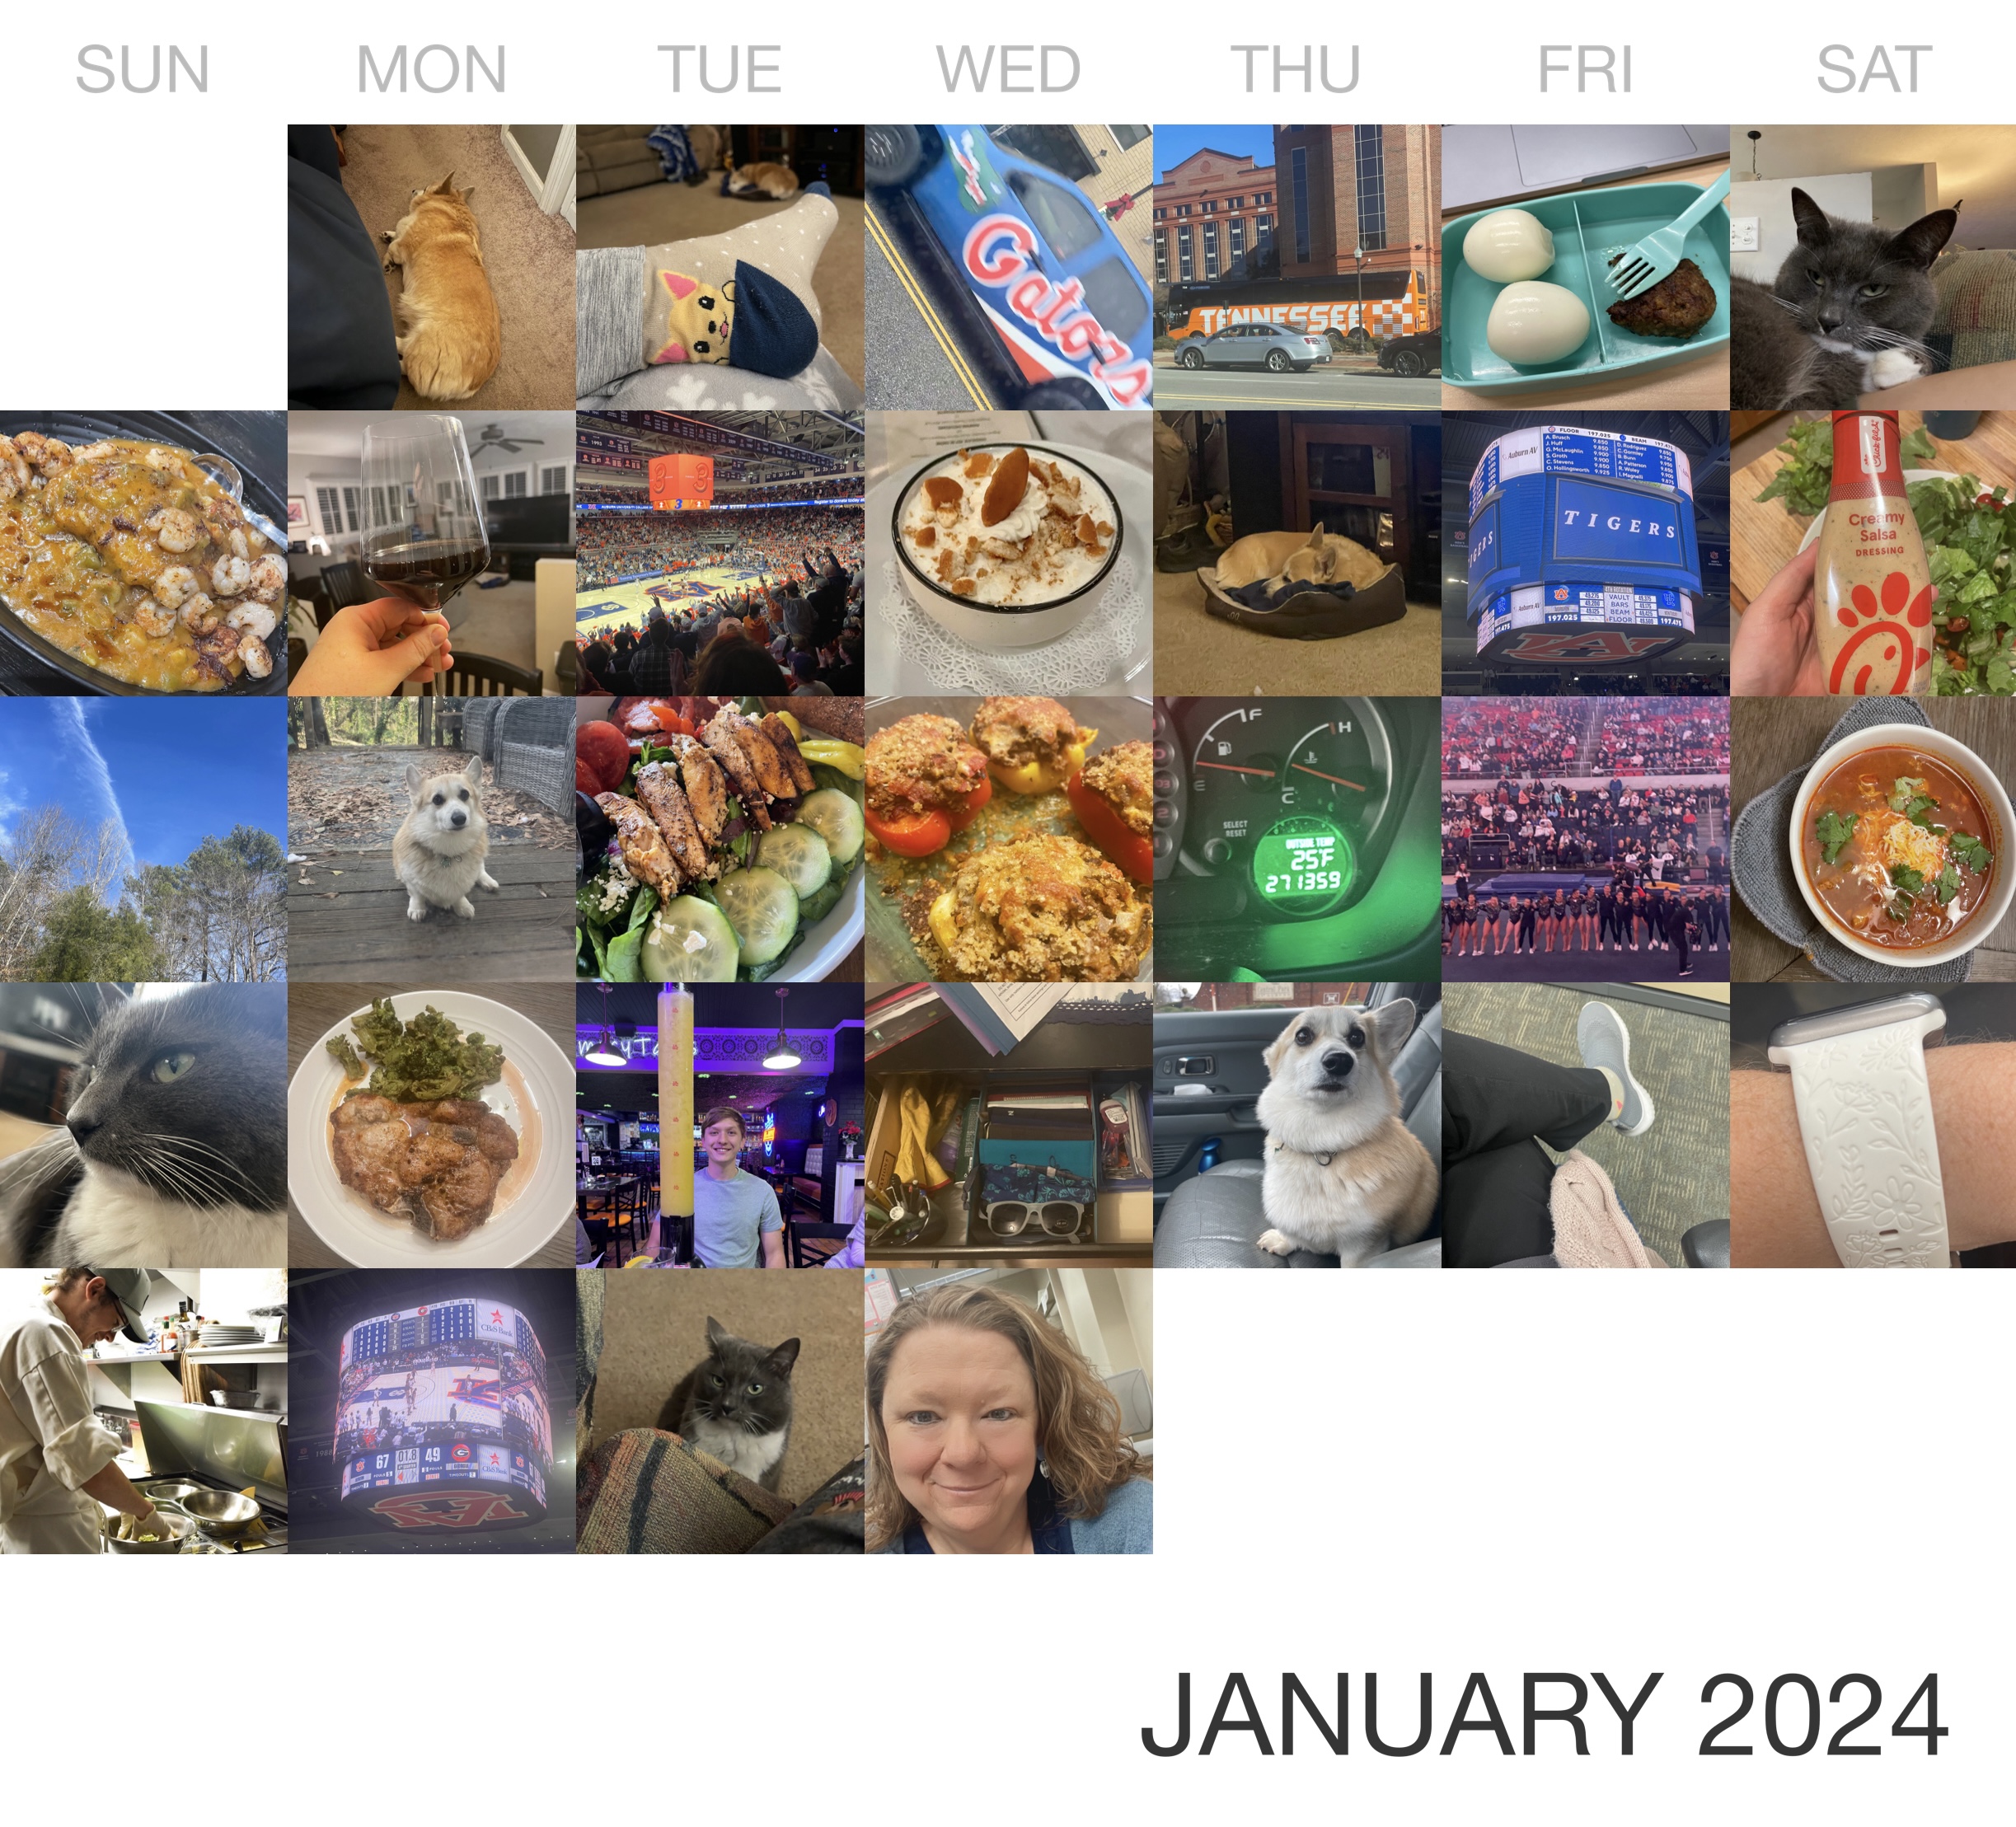 January 2024 Collage - Memories of the Month - Here's a great idea for wrapping up the month with a set of questions to remember how your last month with.  I love going back and reading through what happened throughout the years.